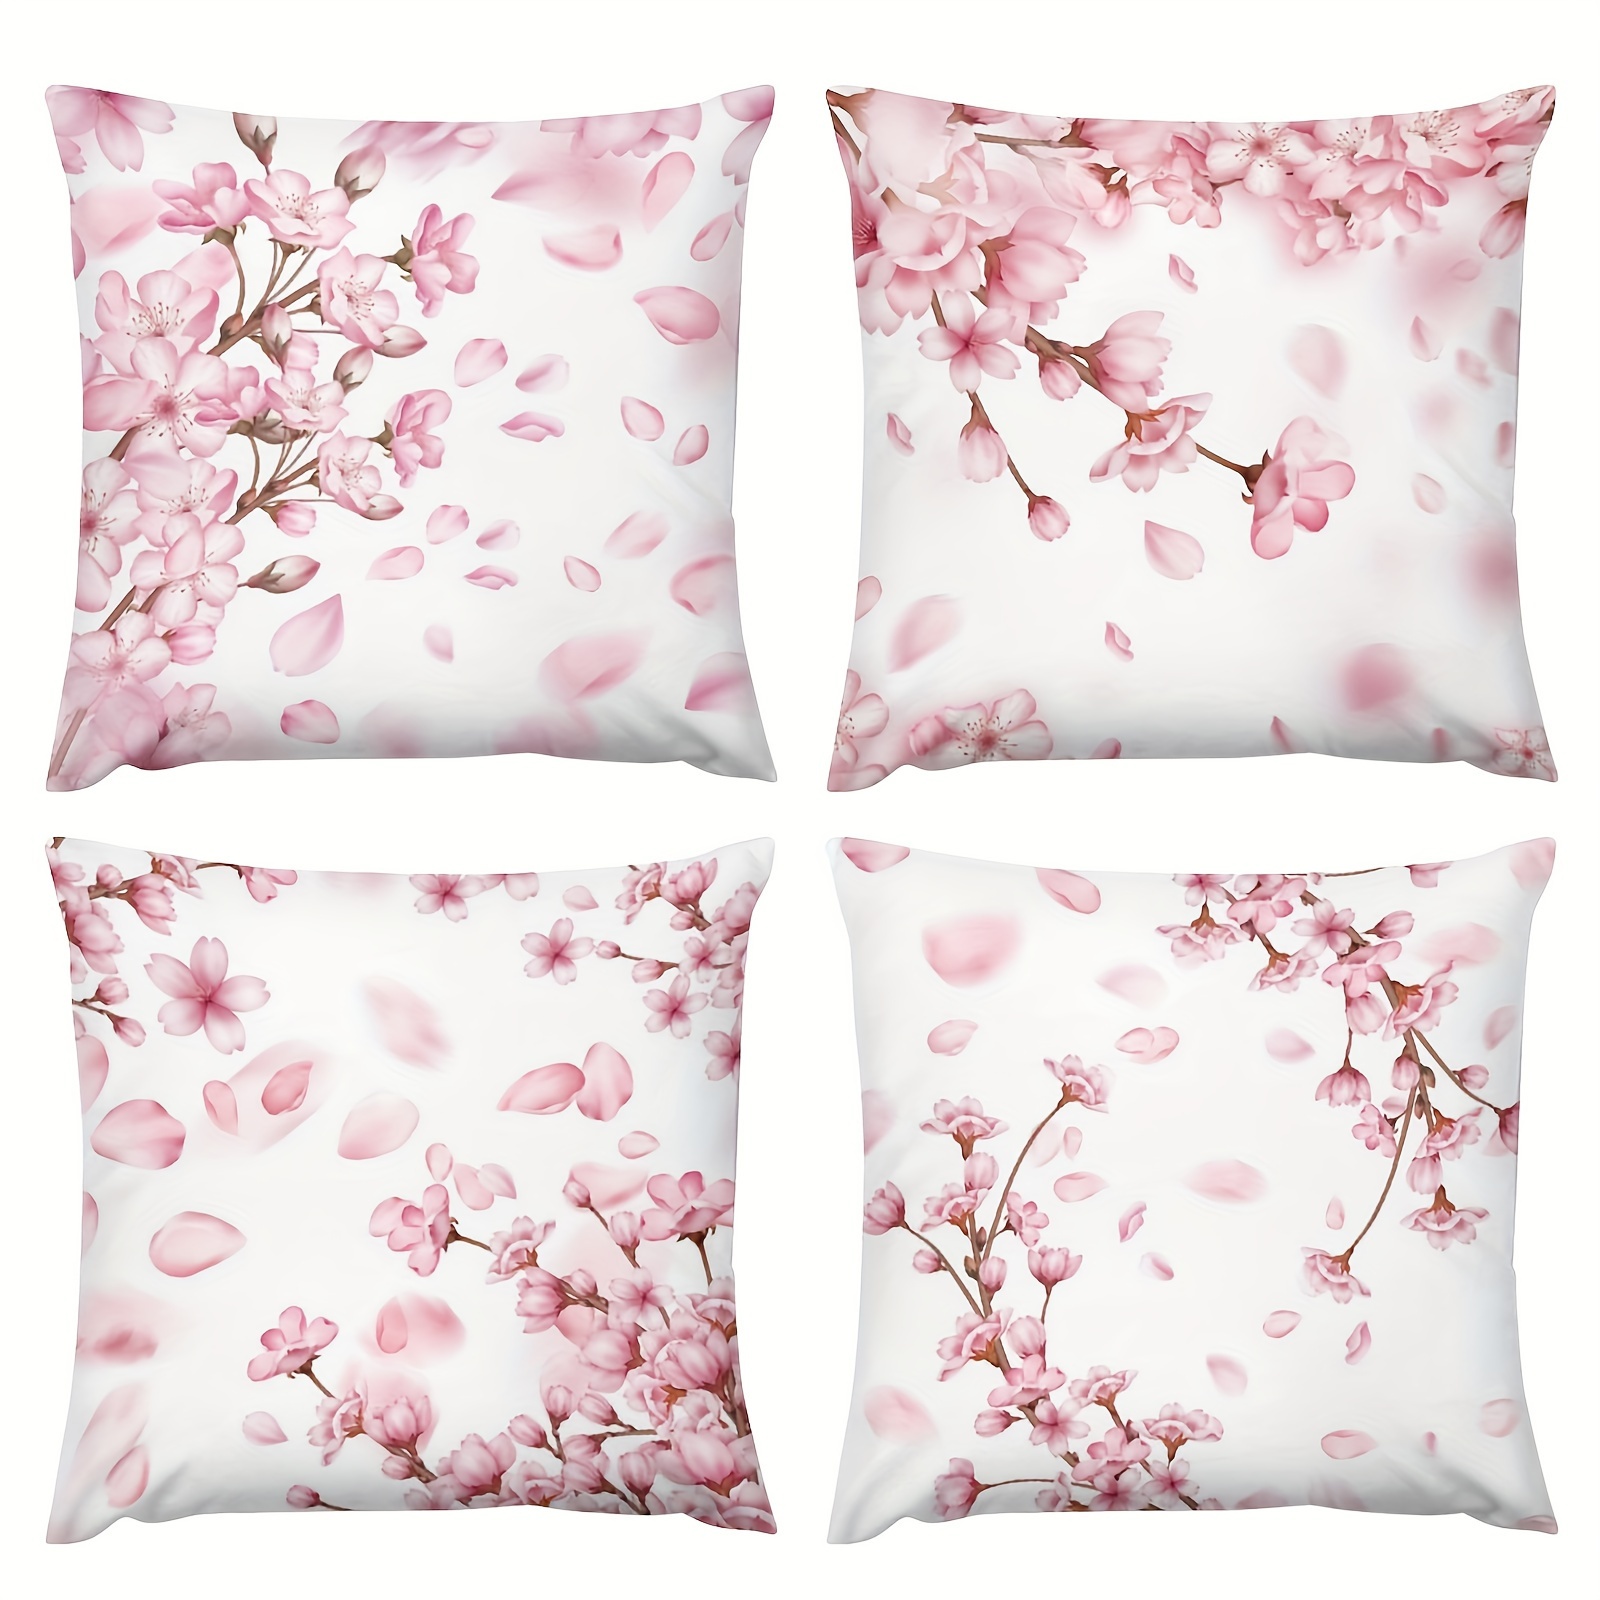 

4pcs, Sakura Polyester Throw Pillow Case, Cherry Pattern, Double-sided Pattern, Room Decoration, Aesthetic Room Decor, Bedroom Decor, Home Decoration, House Decor, Pillow Insert Not Included